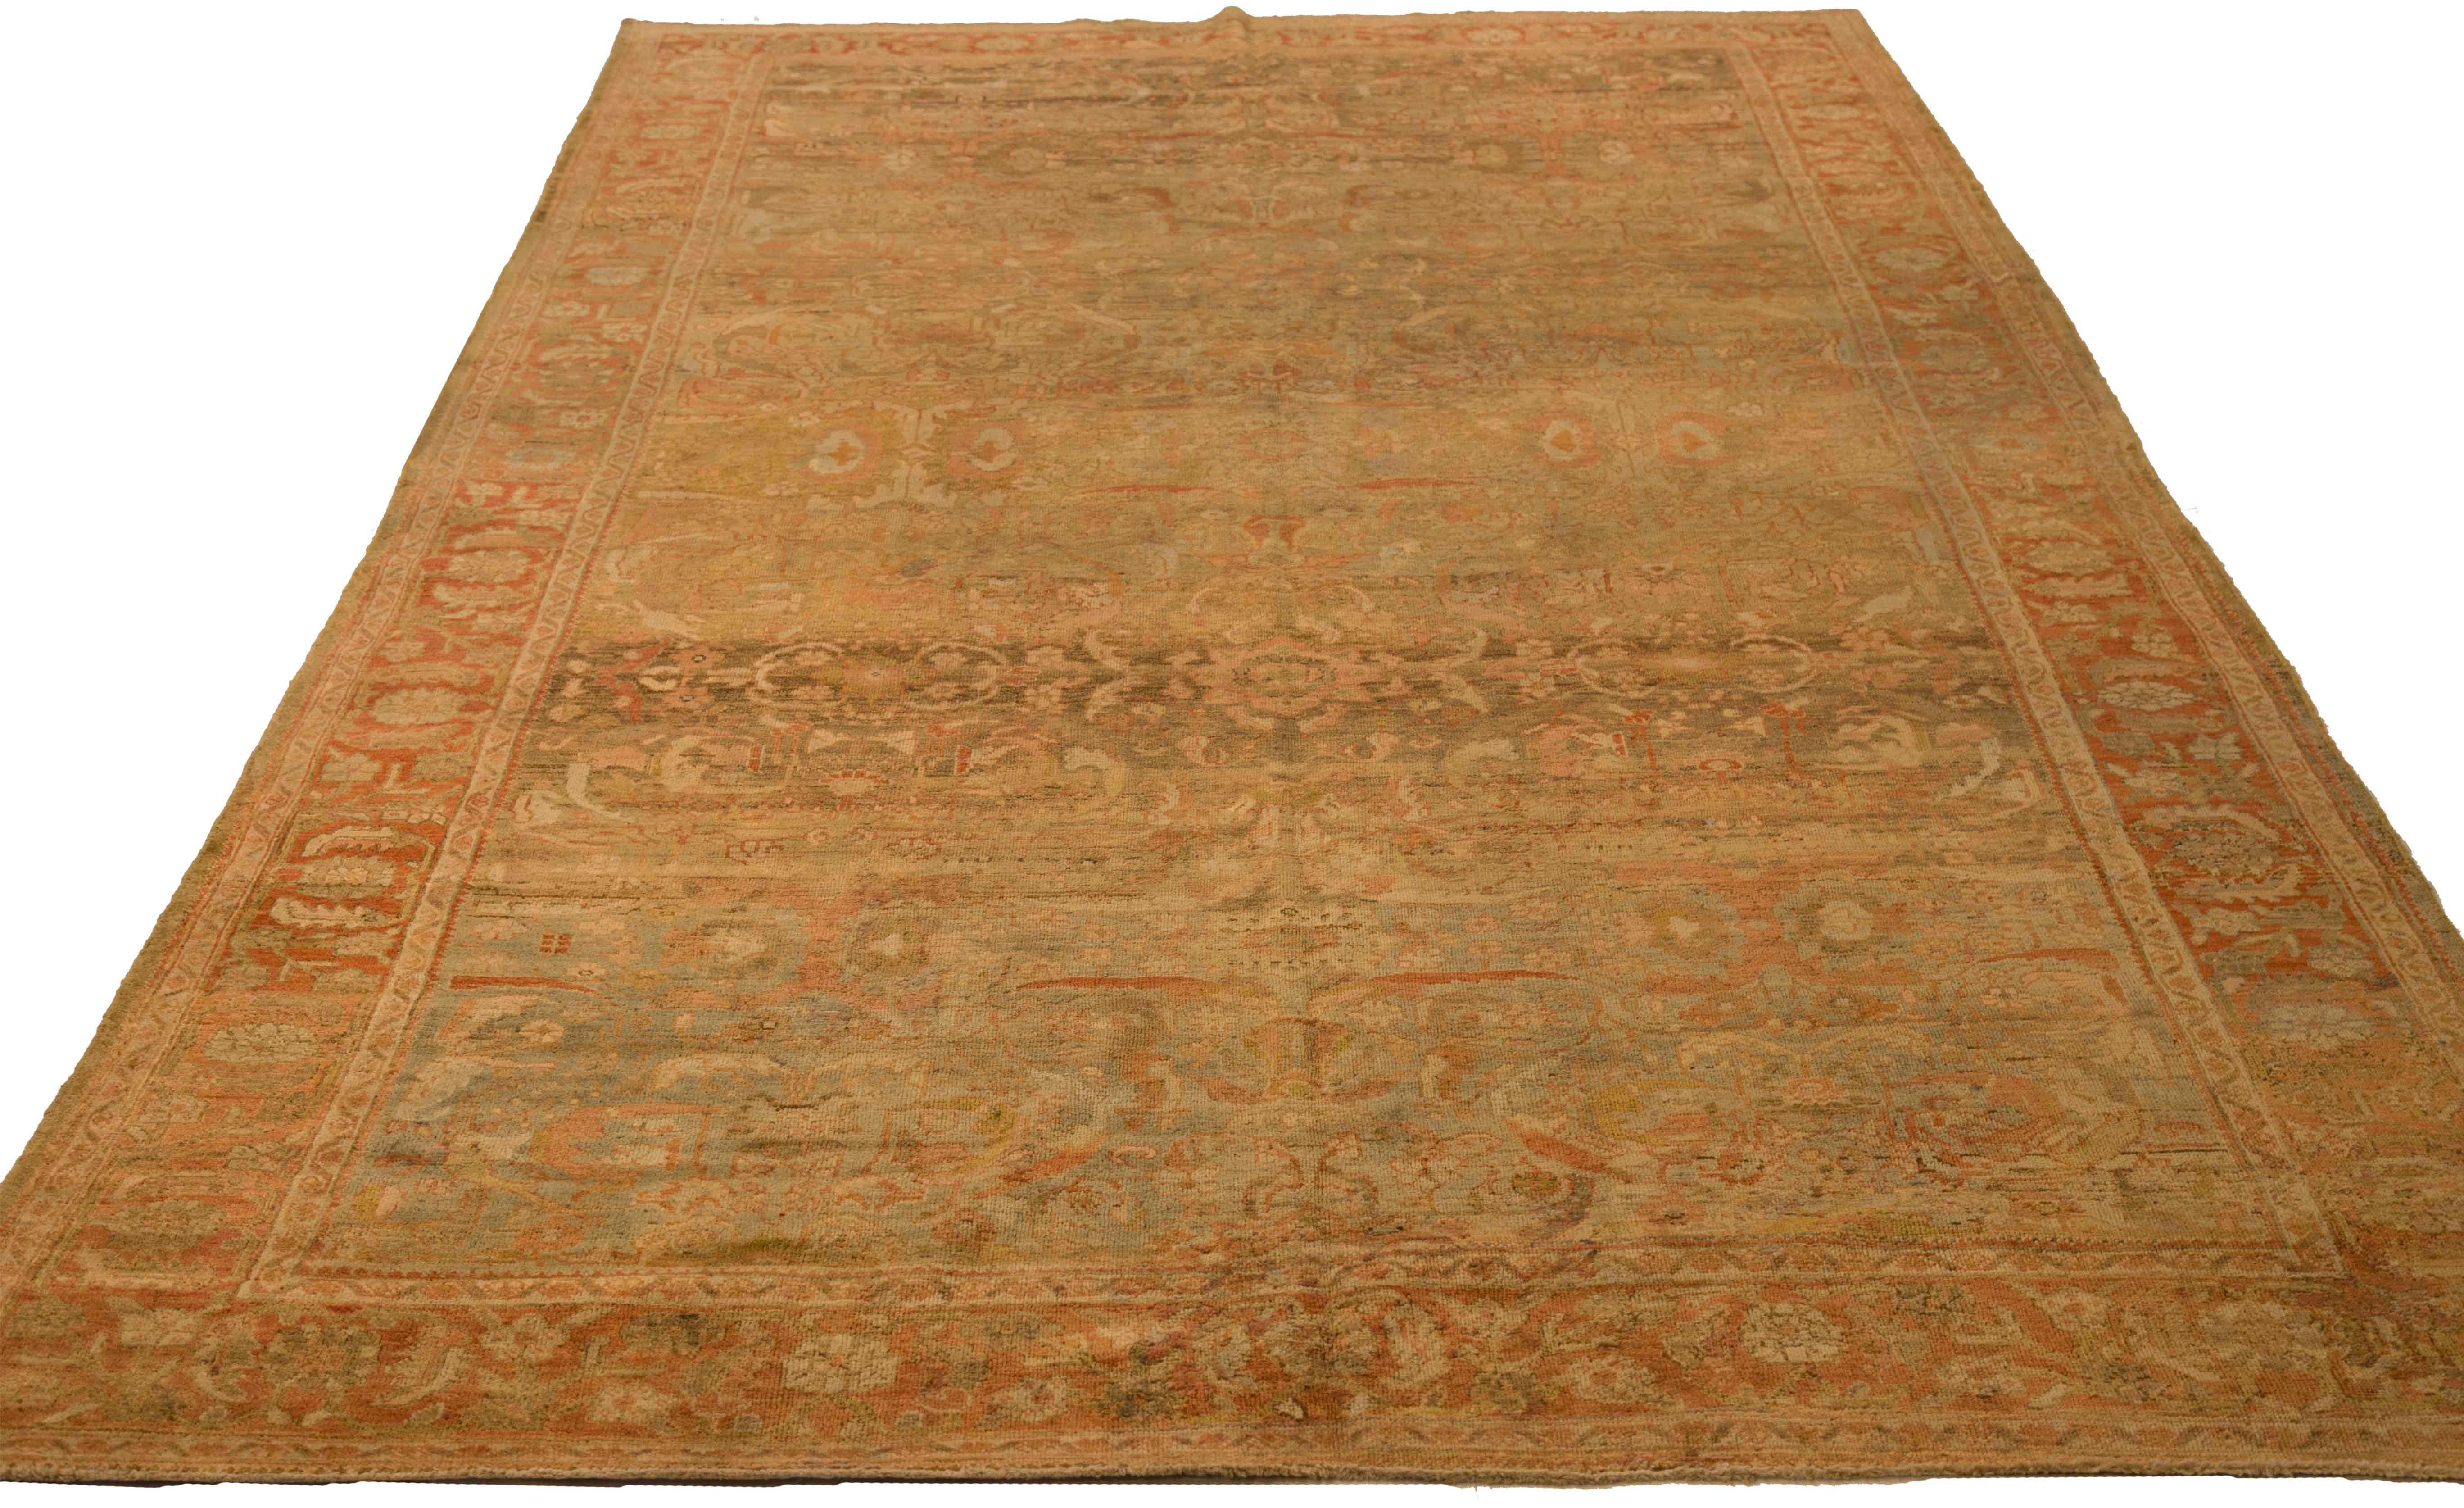 1930s Antique Persian Rug Malayer Design with Sultry Red and Brown Floral Motif In Excellent Condition For Sale In Dallas, TX